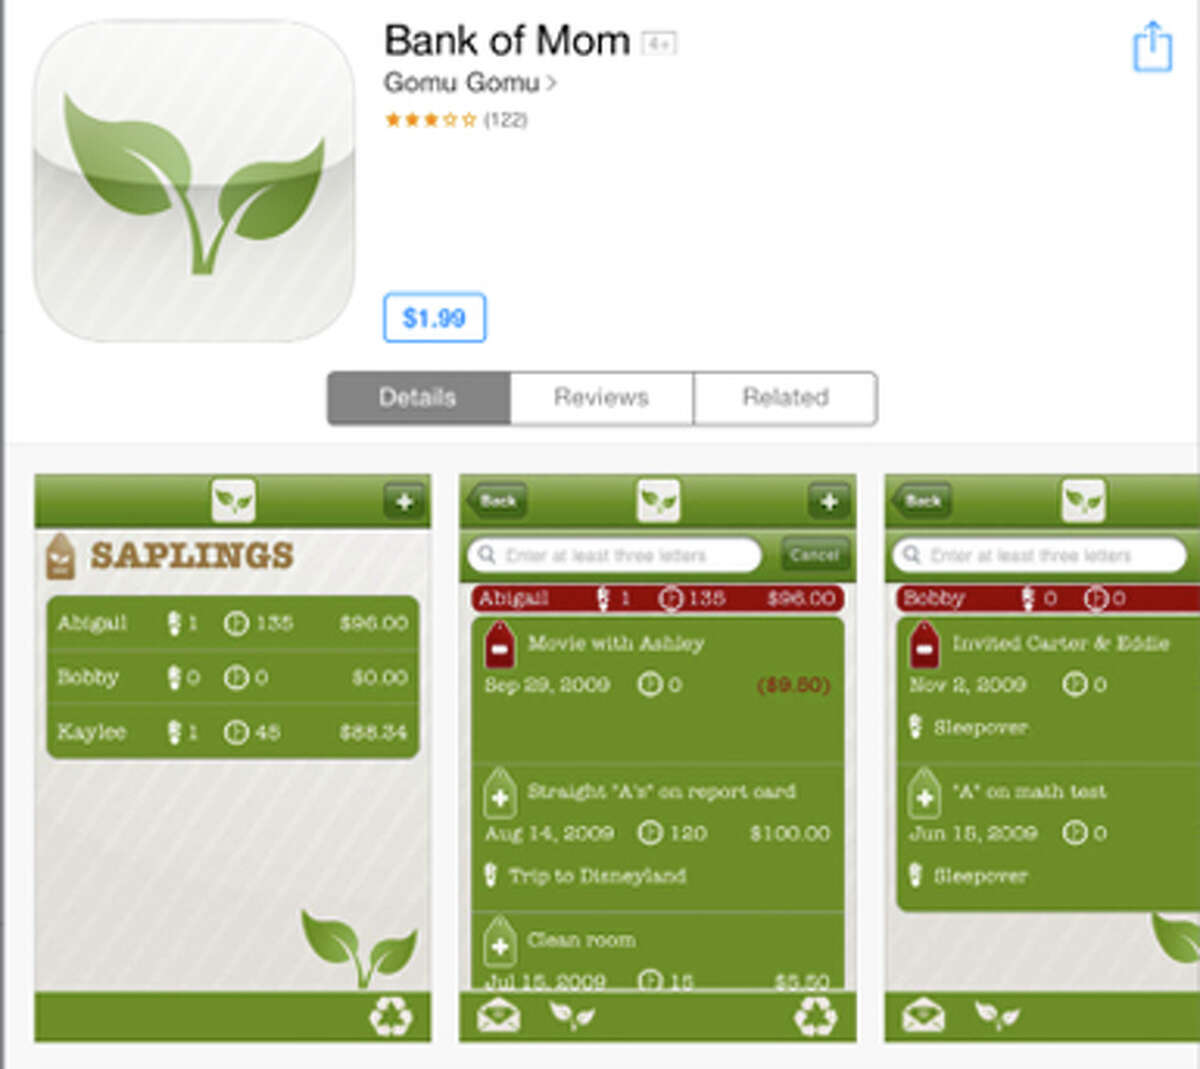 The Bank of Mom app allows parents to create and monitor separate spending accounts for each of their children.